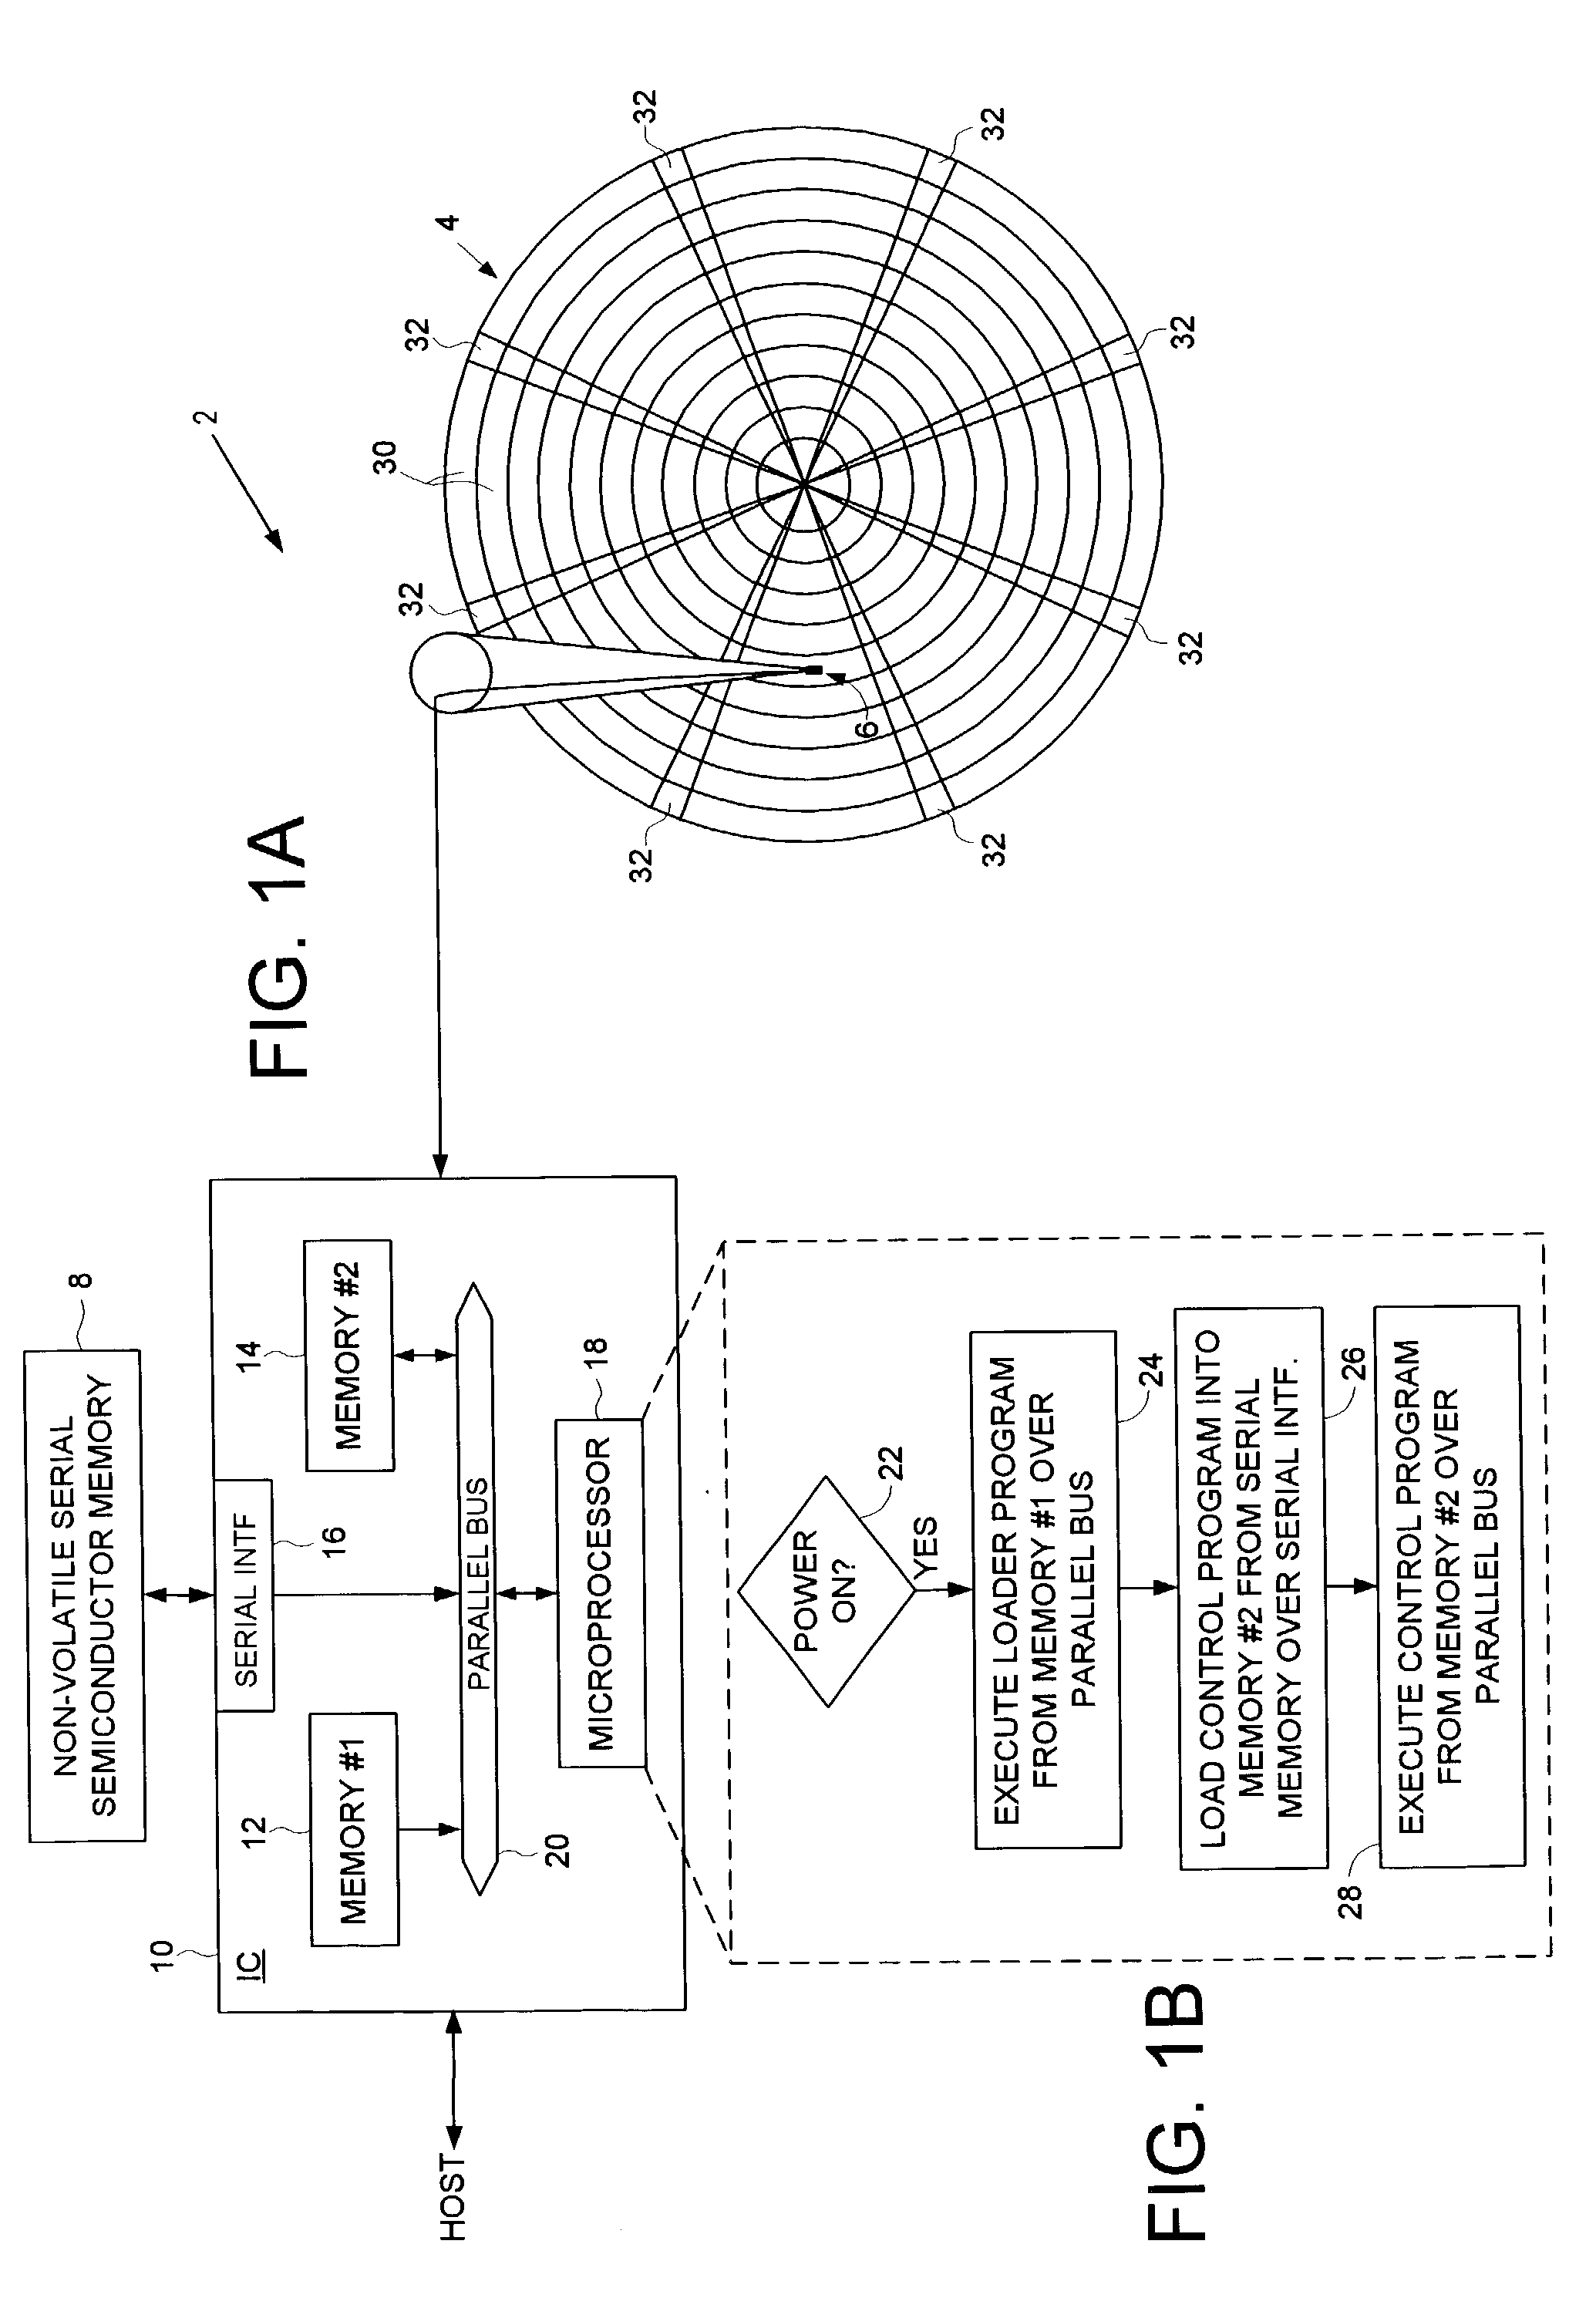 Disk drive employing a non-volatile serial semiconductor memory for storing a control program for a microprocessor